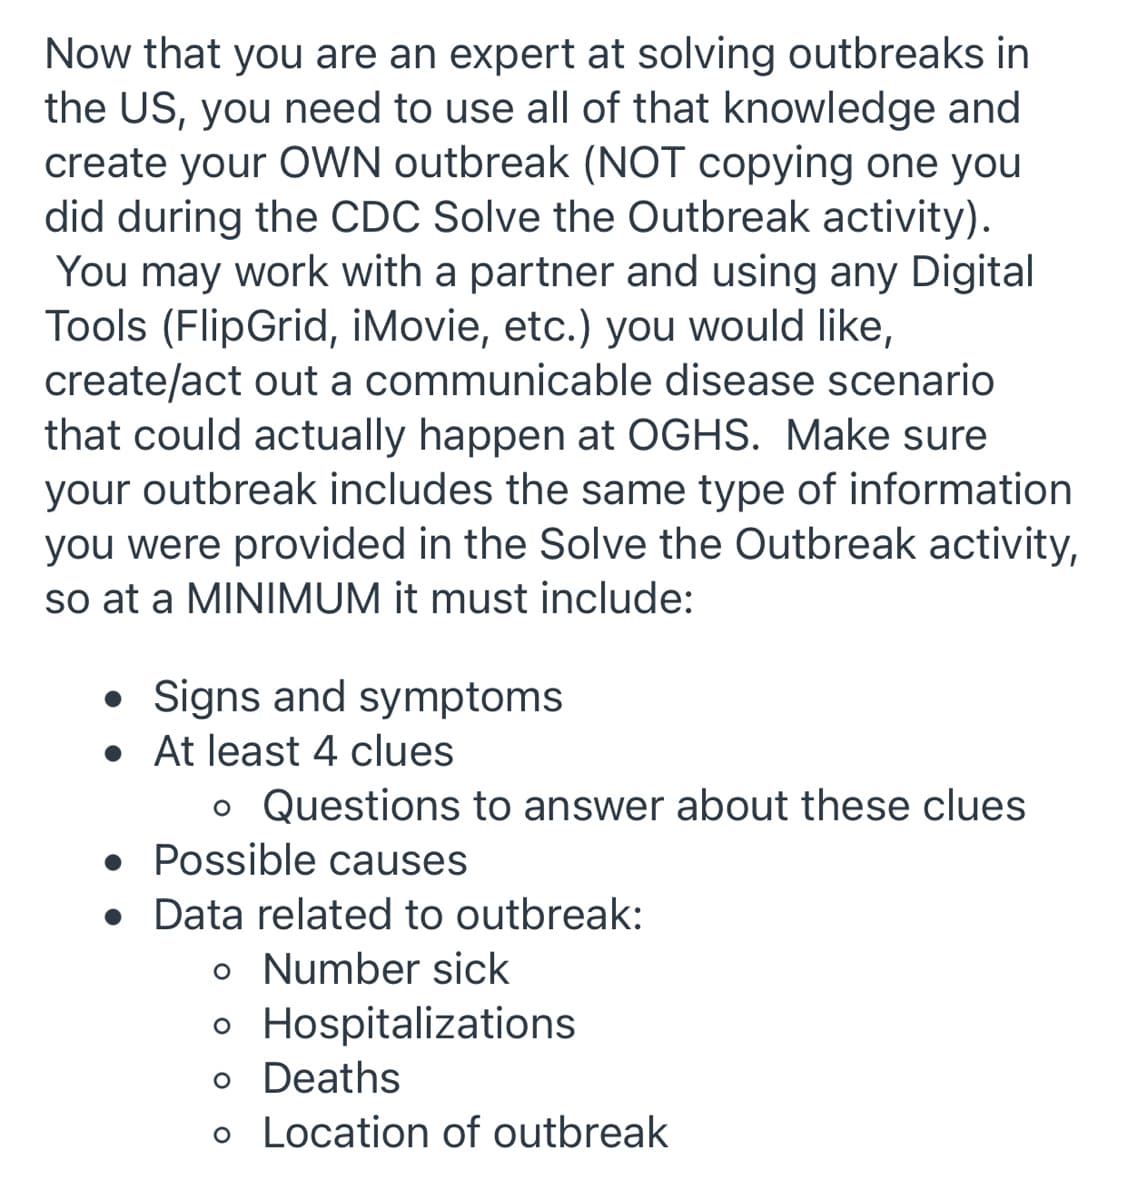 Now that you are an expert at solving outbreaks in
the US, you need to use all of that knowledge and
create your OWN outbreak (NOT copying one you
did during the CDC Solve the Outbreak activity).
You may work with a partner and using any Digital
Tools (FlipGrid, iMovie, etc.) you would like,
create/act out a communicable disease scenario
that could actually happen at OGHS. Make sure
your outbreak includes the same type of information
you were provided in the Solve the Outbreak activity,
so at a MINIMUM it must include:
• Signs and symptoms
• At least 4 clues
o Questions to answer about these clues
• Possible causes
• Data related to outbreak:
o Number sick
o Hospitalizations
o Deaths
o Location of outbreak
